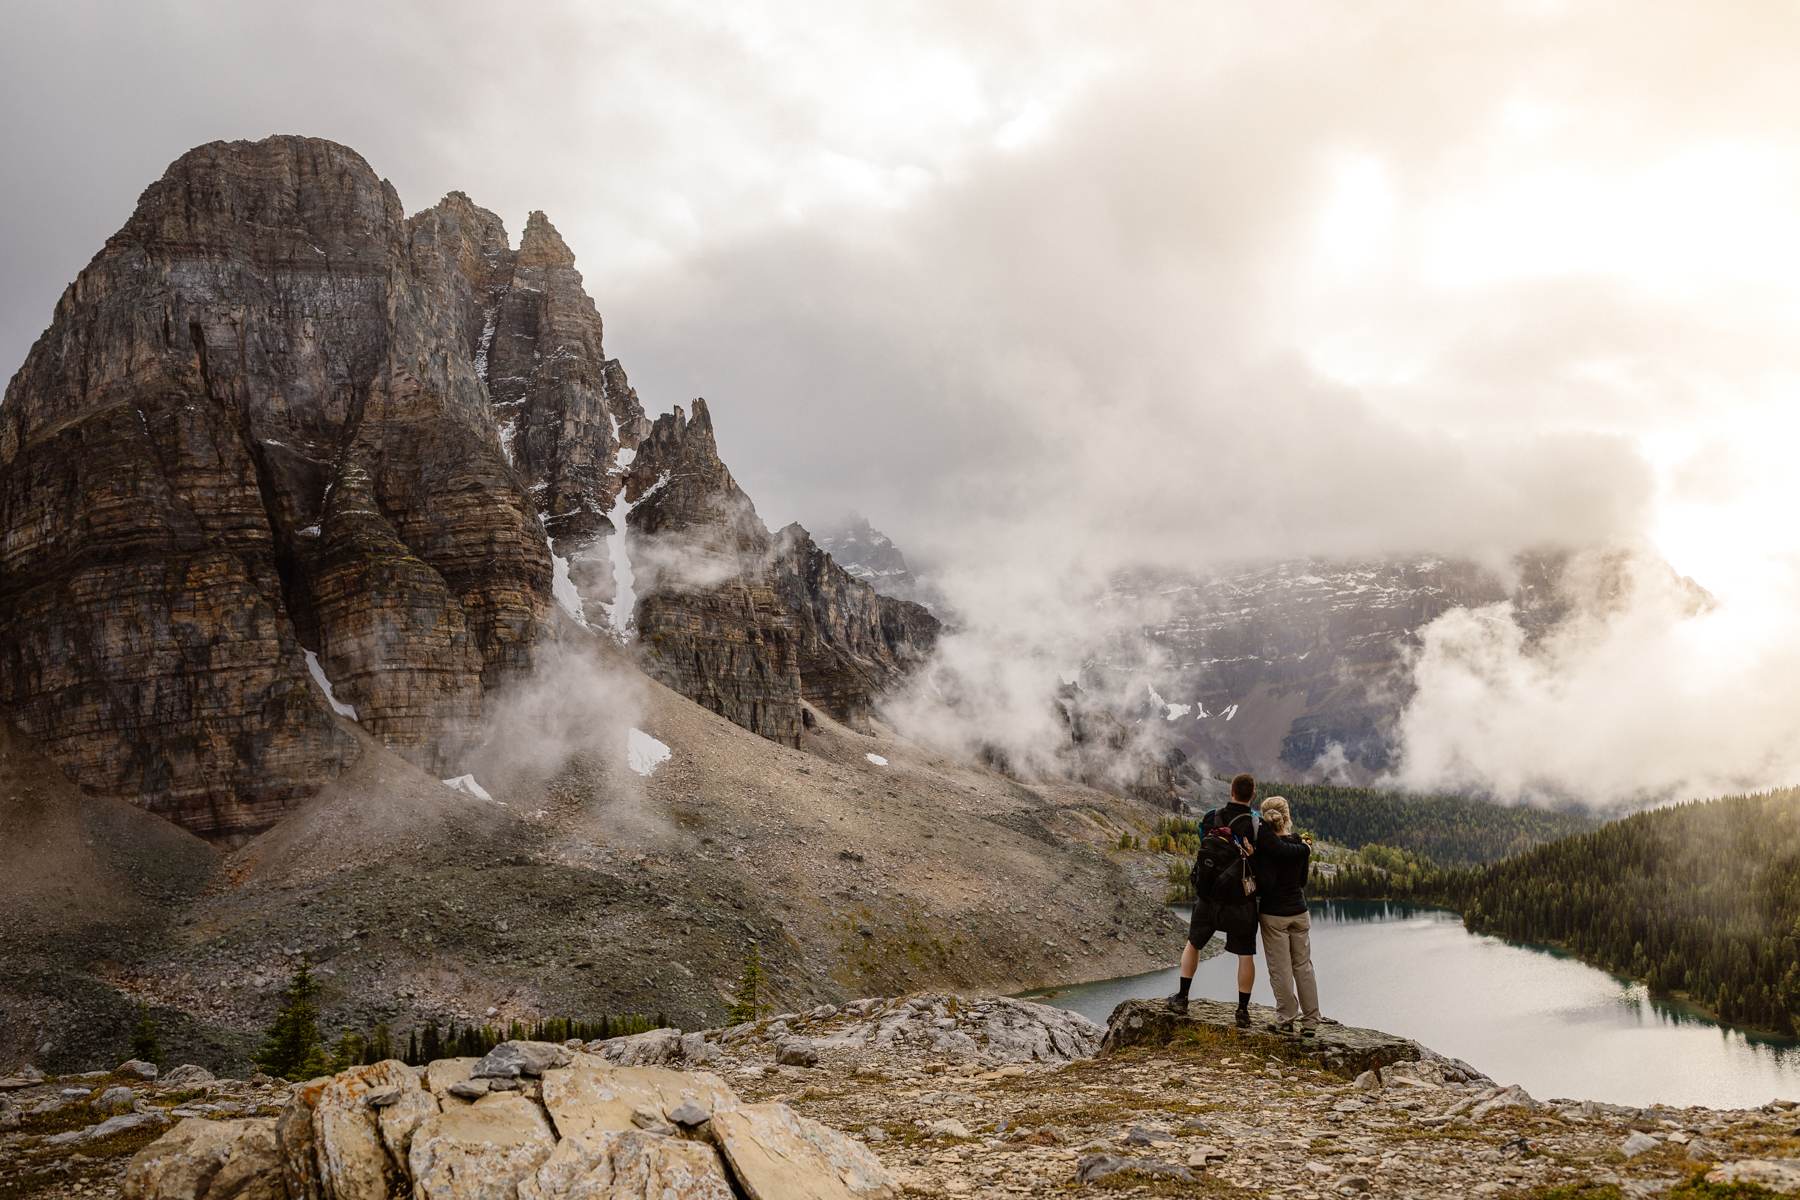 Mount Assiniboine Elopement Photographers at a Backcountry Lodge - Photo 20